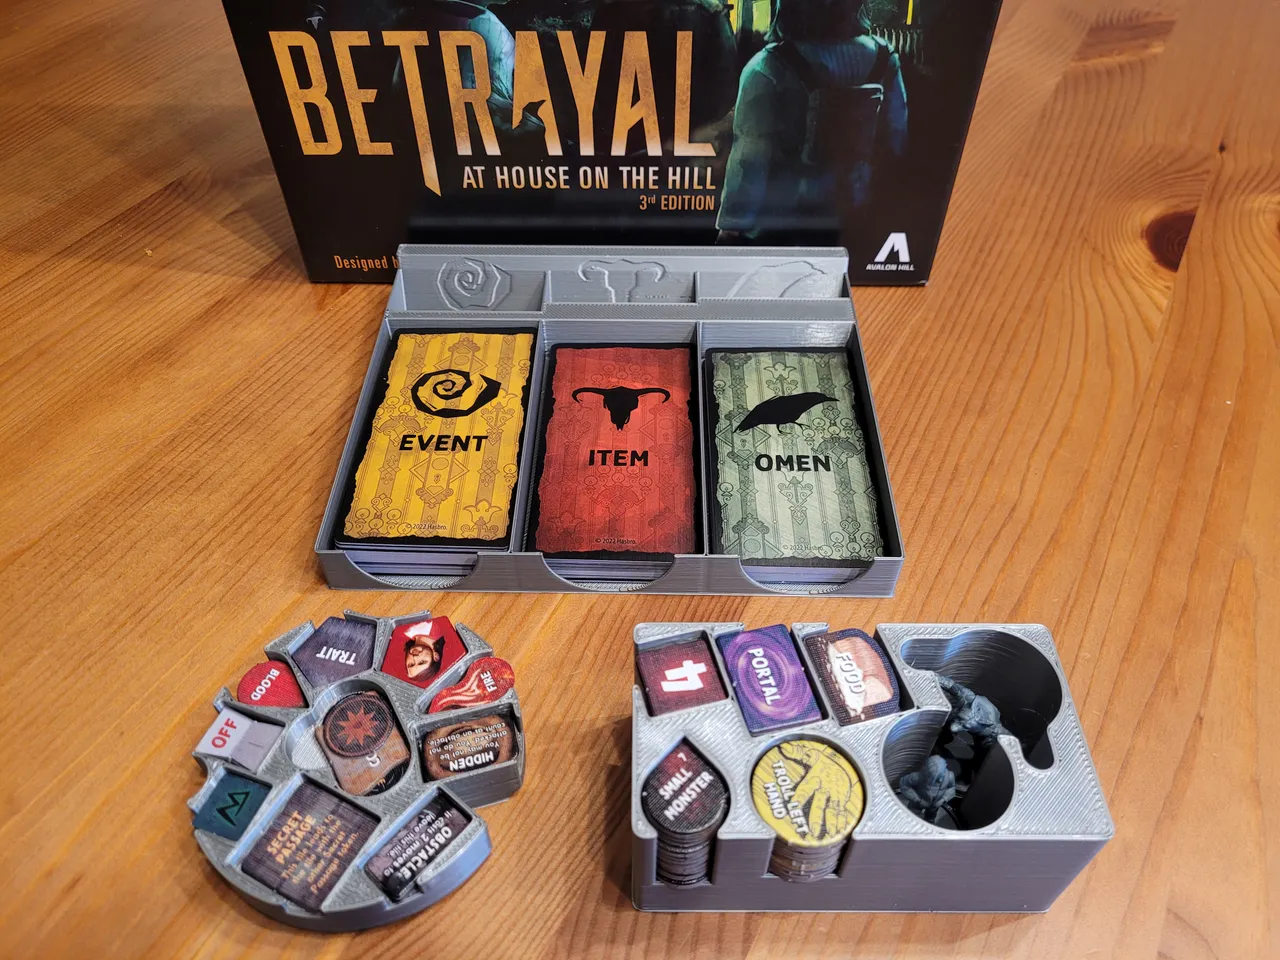 Betrayal: The Werewolf's Journey – Blood on the Moon